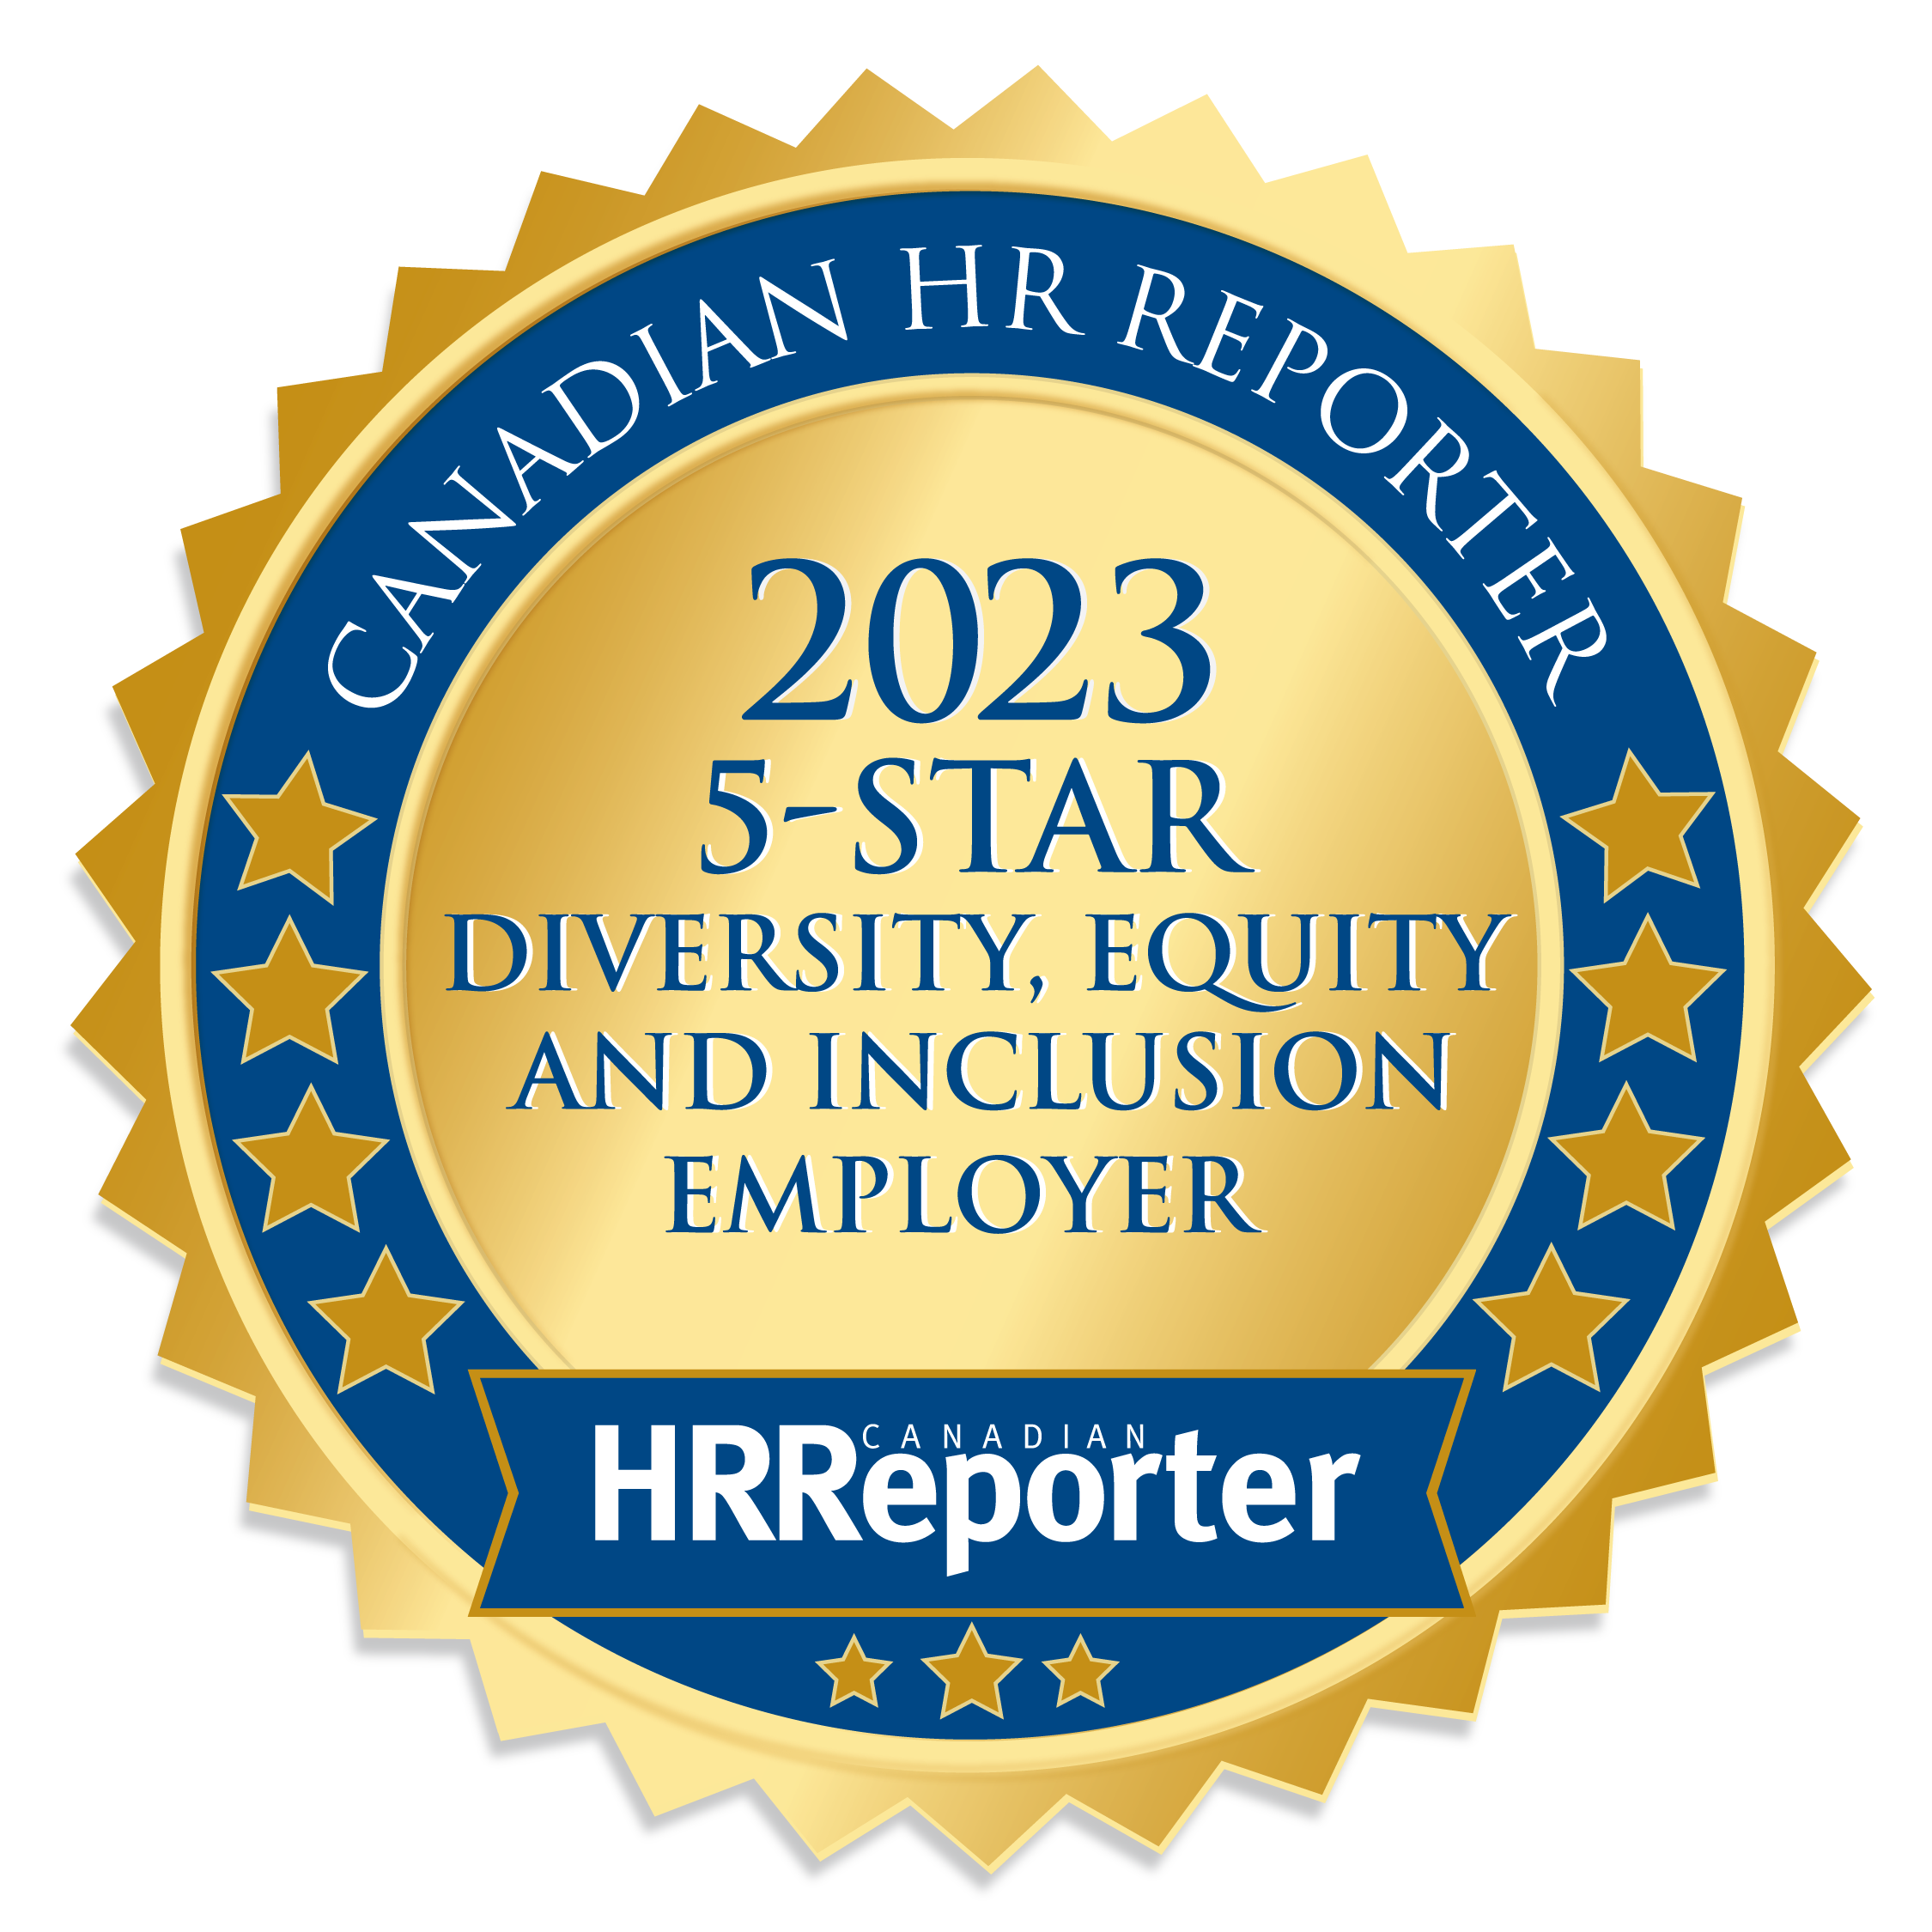 2023 5-STAR DIVERSITY, EQUITY AND INCLUSION EMPLOYER Canadian HR Reporter